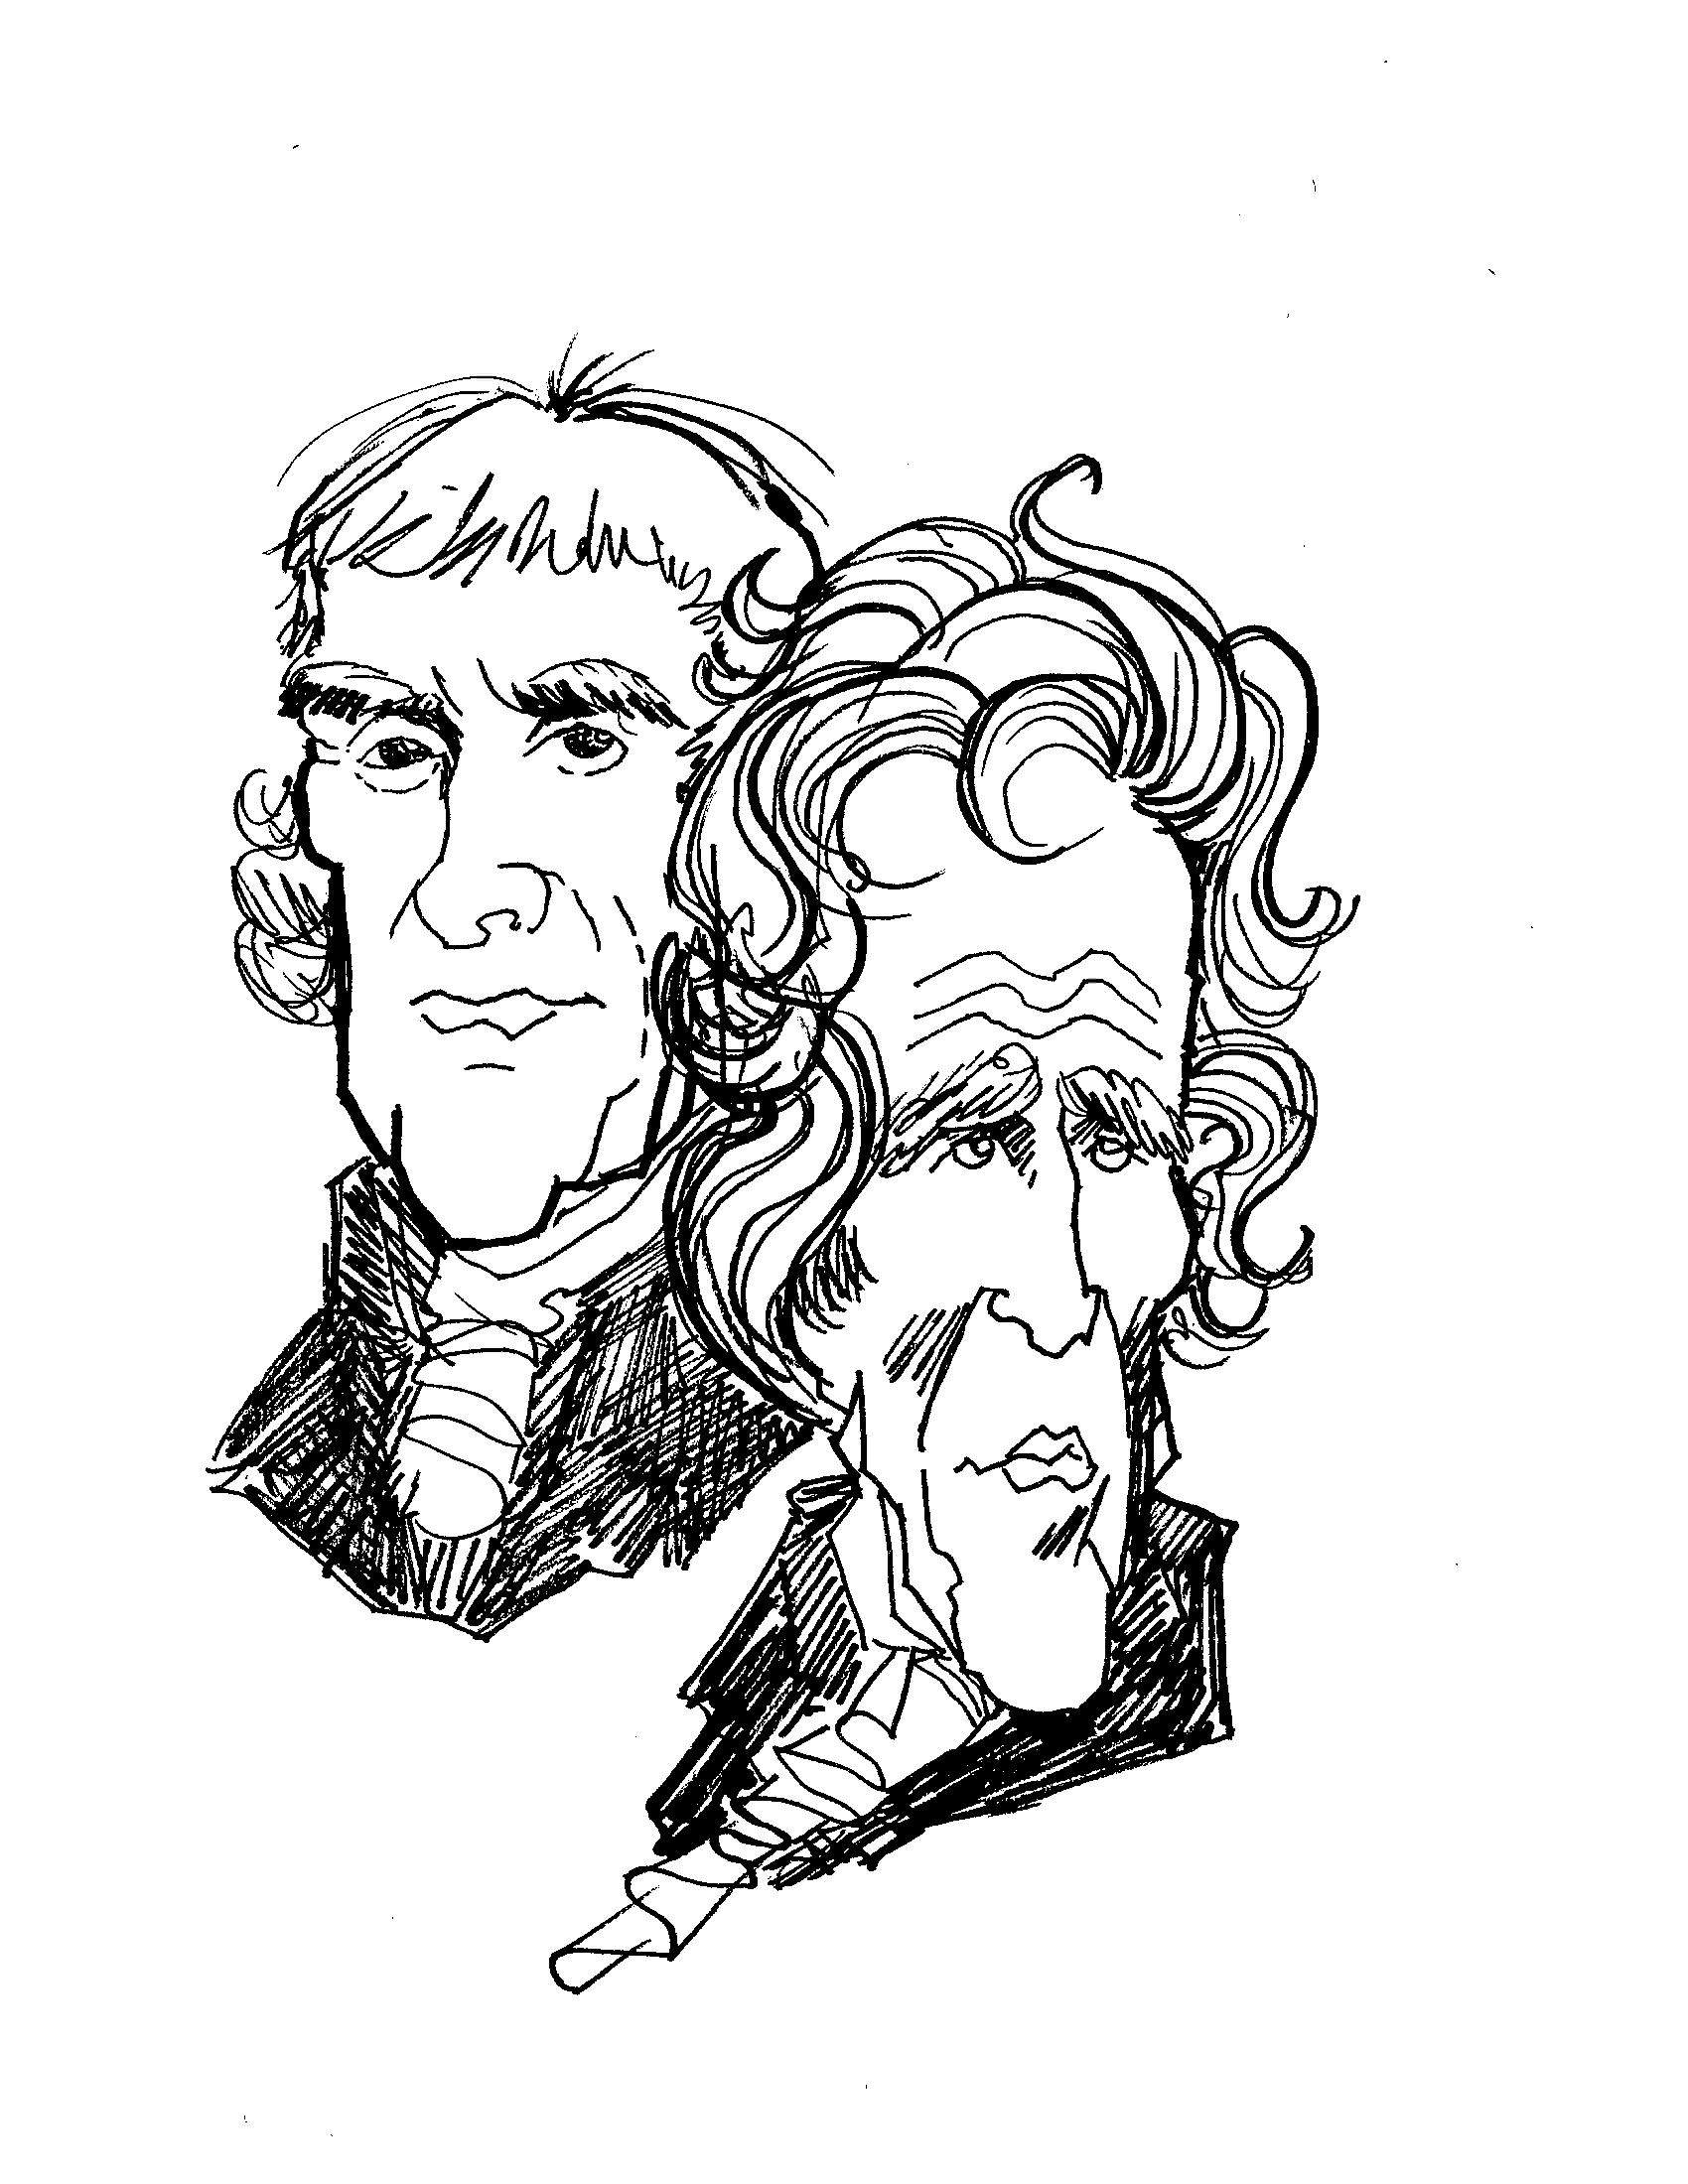 Lewis And Clark Drawing at GetDrawings Free download